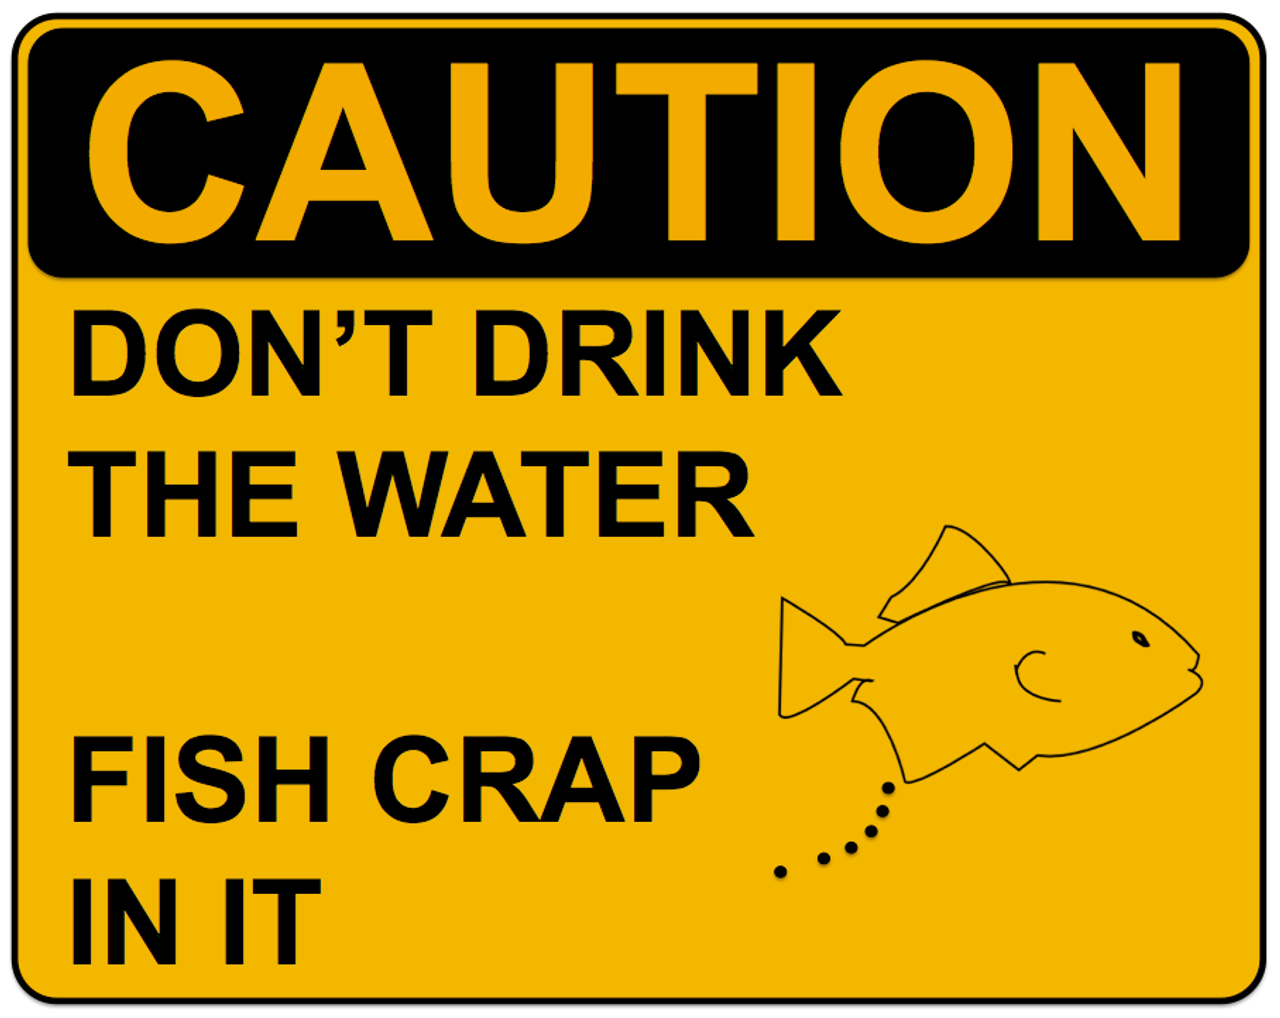 Caution: Don't Drink the Water